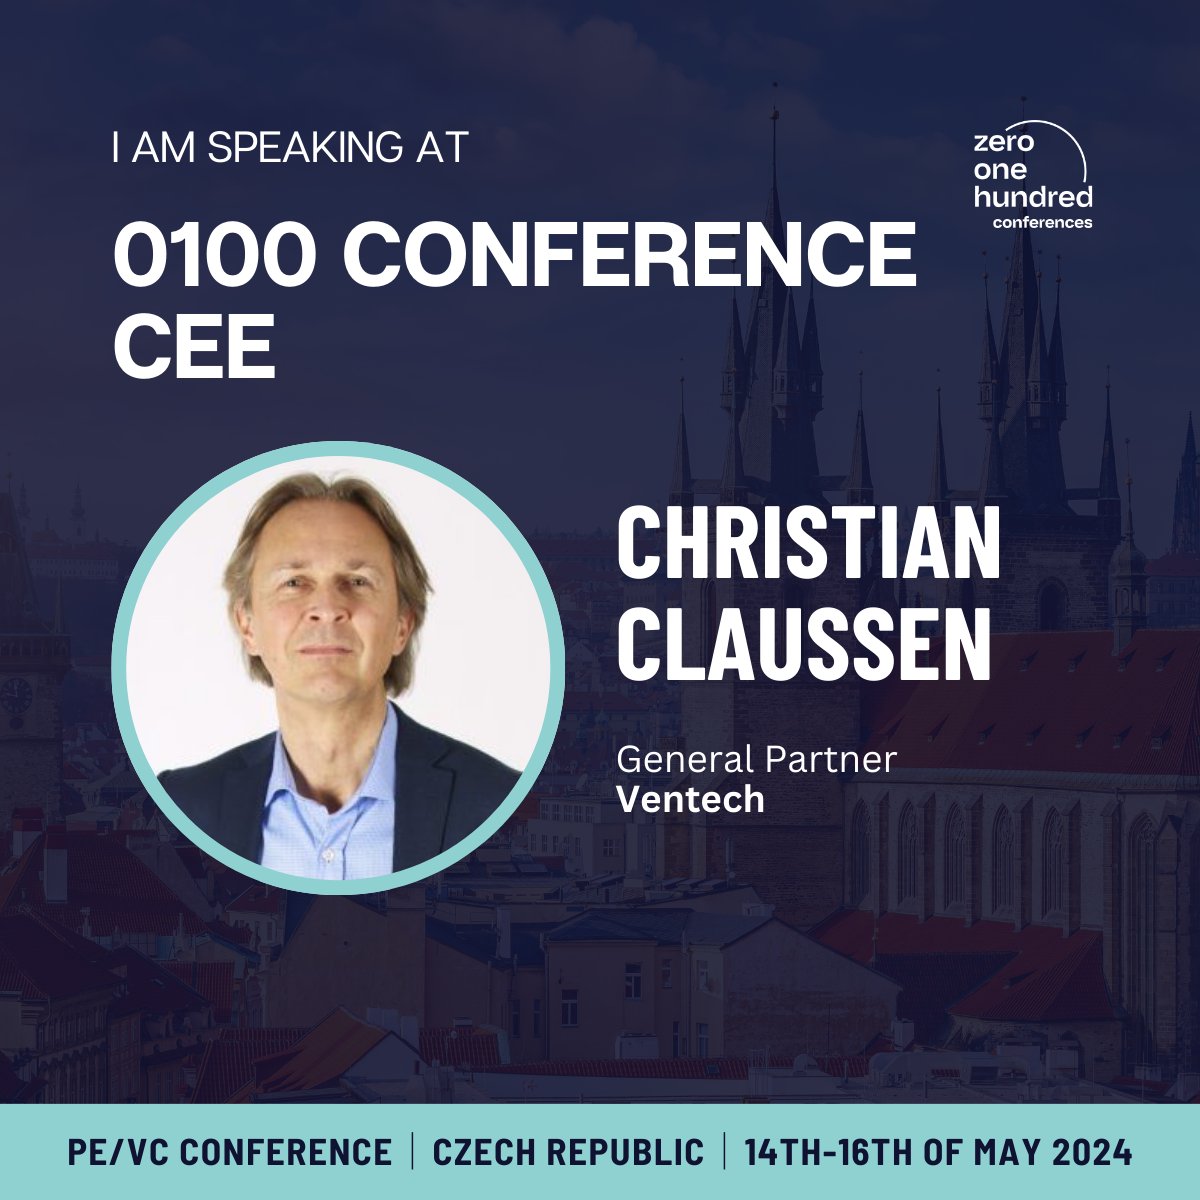 Come and meet @claussenventech, (GP at #Ventech) at the @0100conferences #CEE in #Prague, where he addresses a critical issue: Bridging the Early Stage Funding Gap, with other amazing speakers. 

#CentralEurope #EasternEurope #VC #PE #LPGP #0100conferences